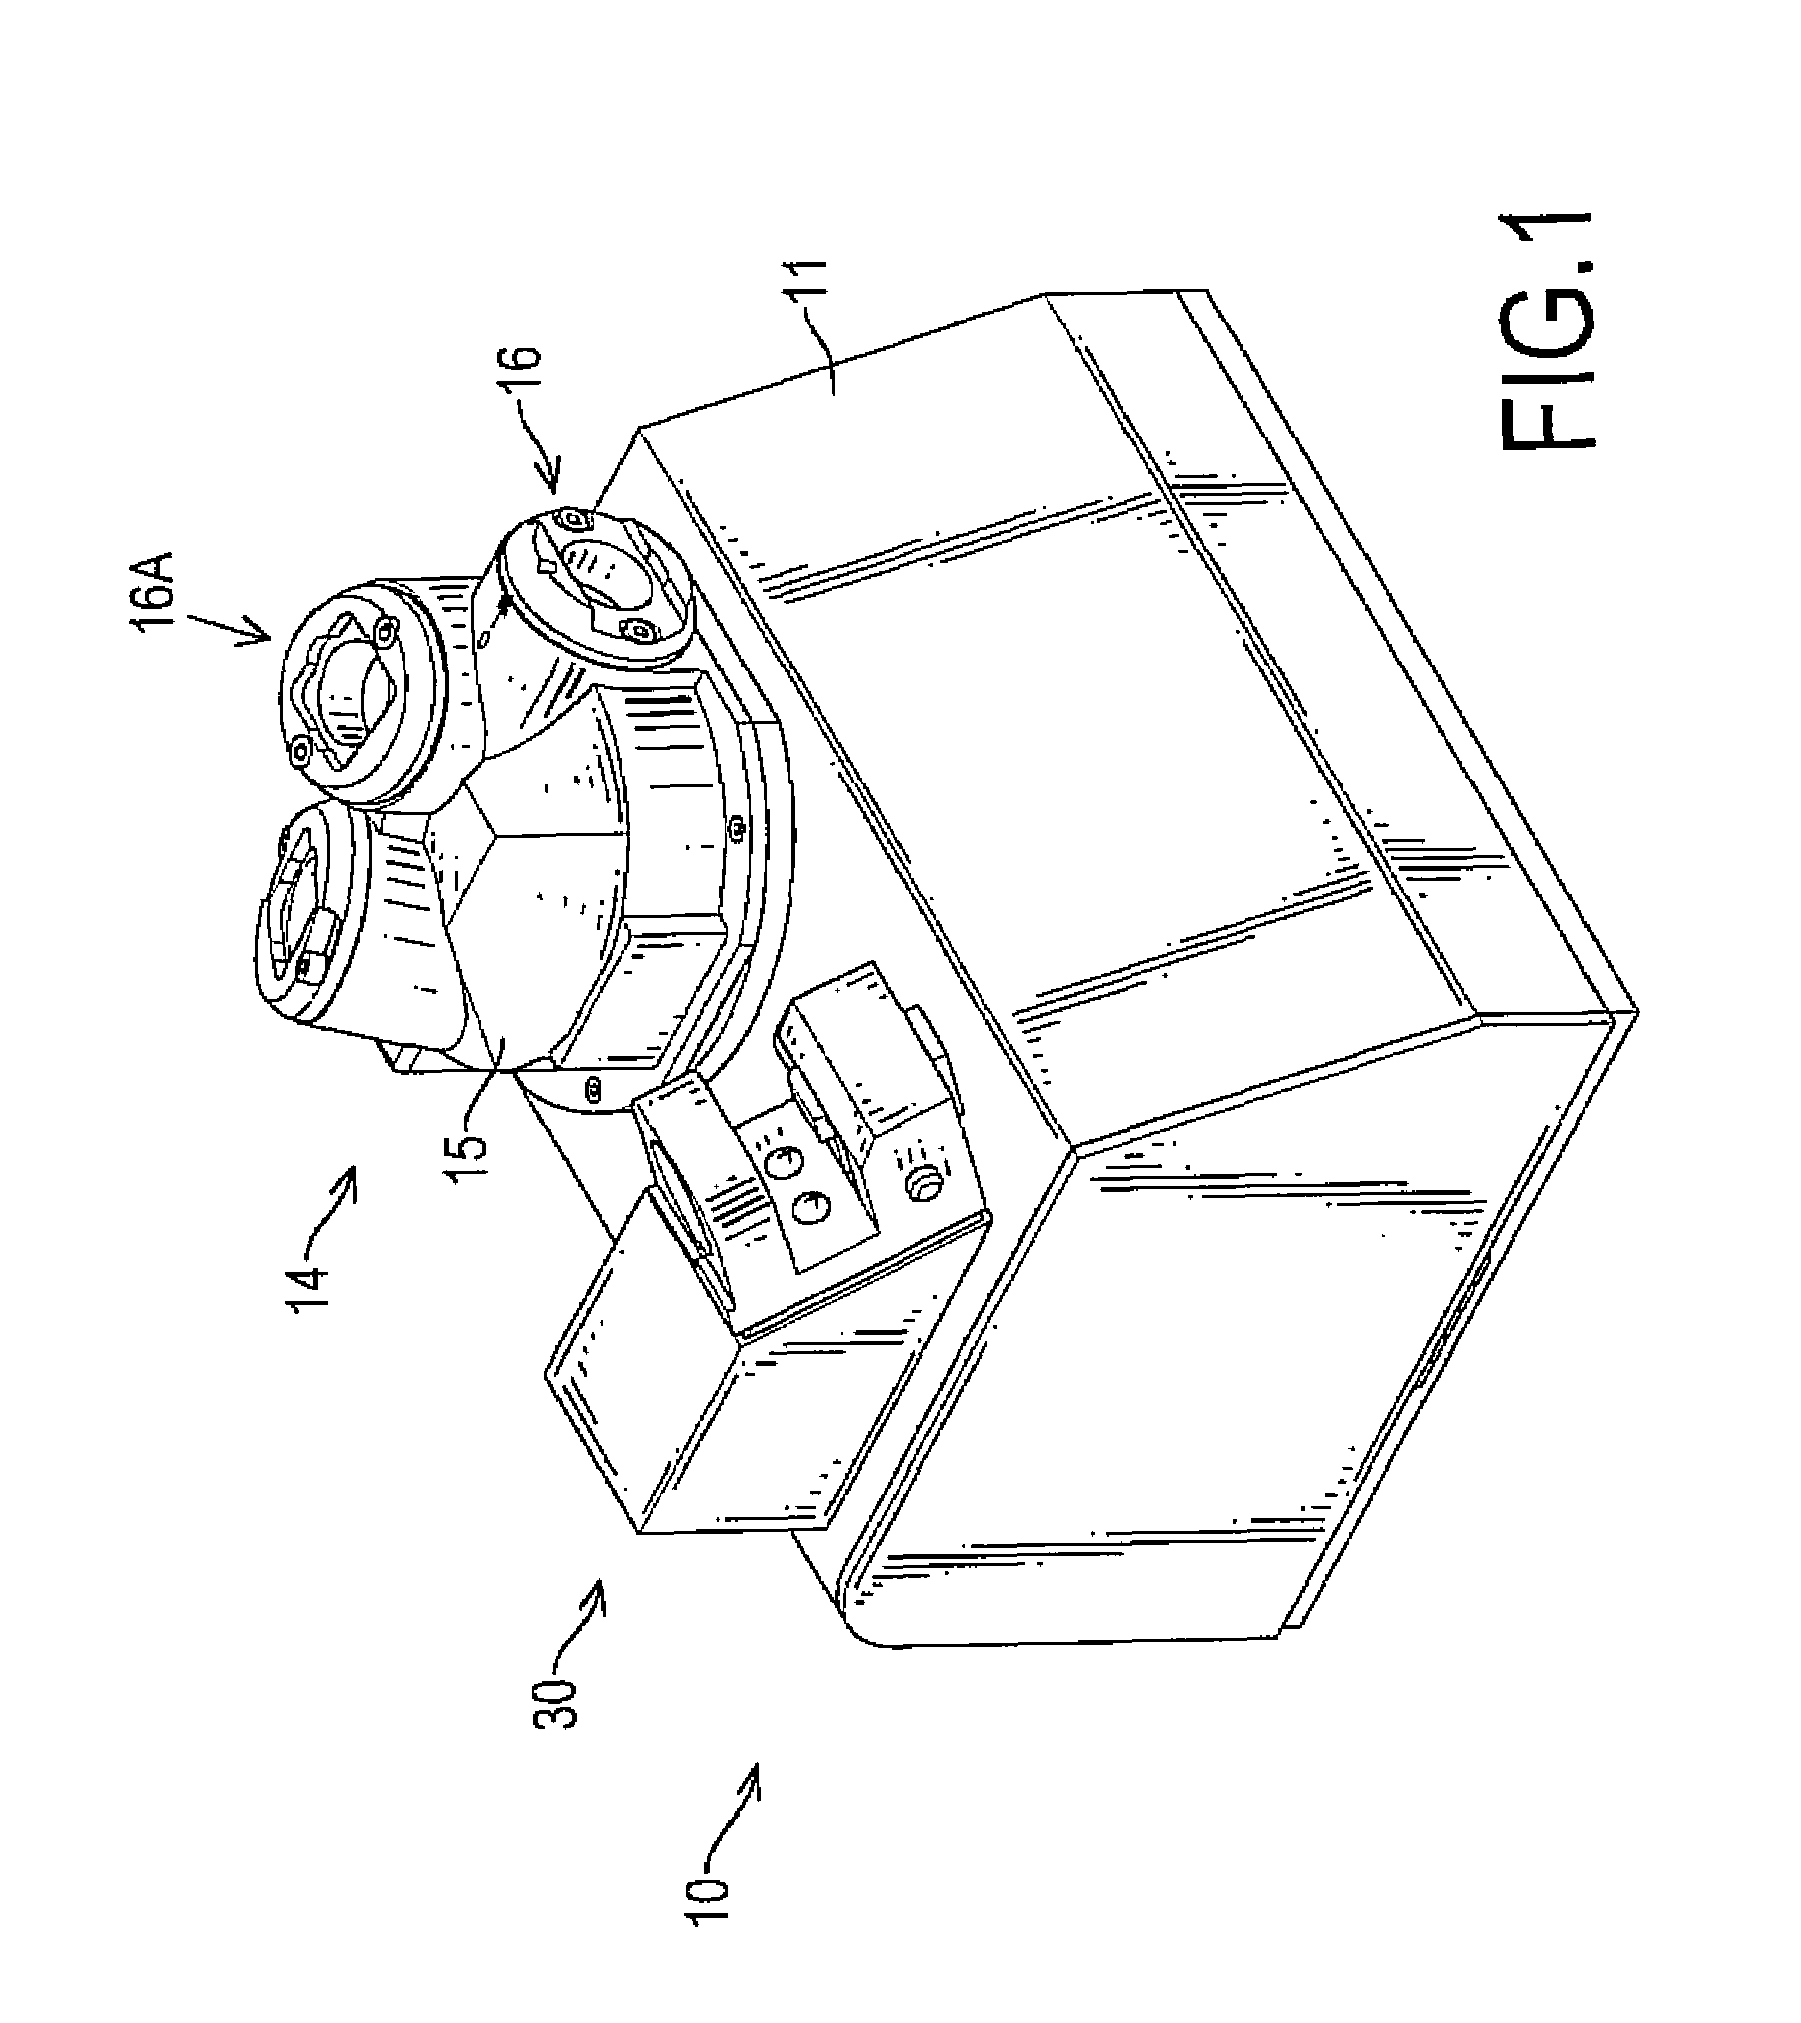 Cutter grinding device